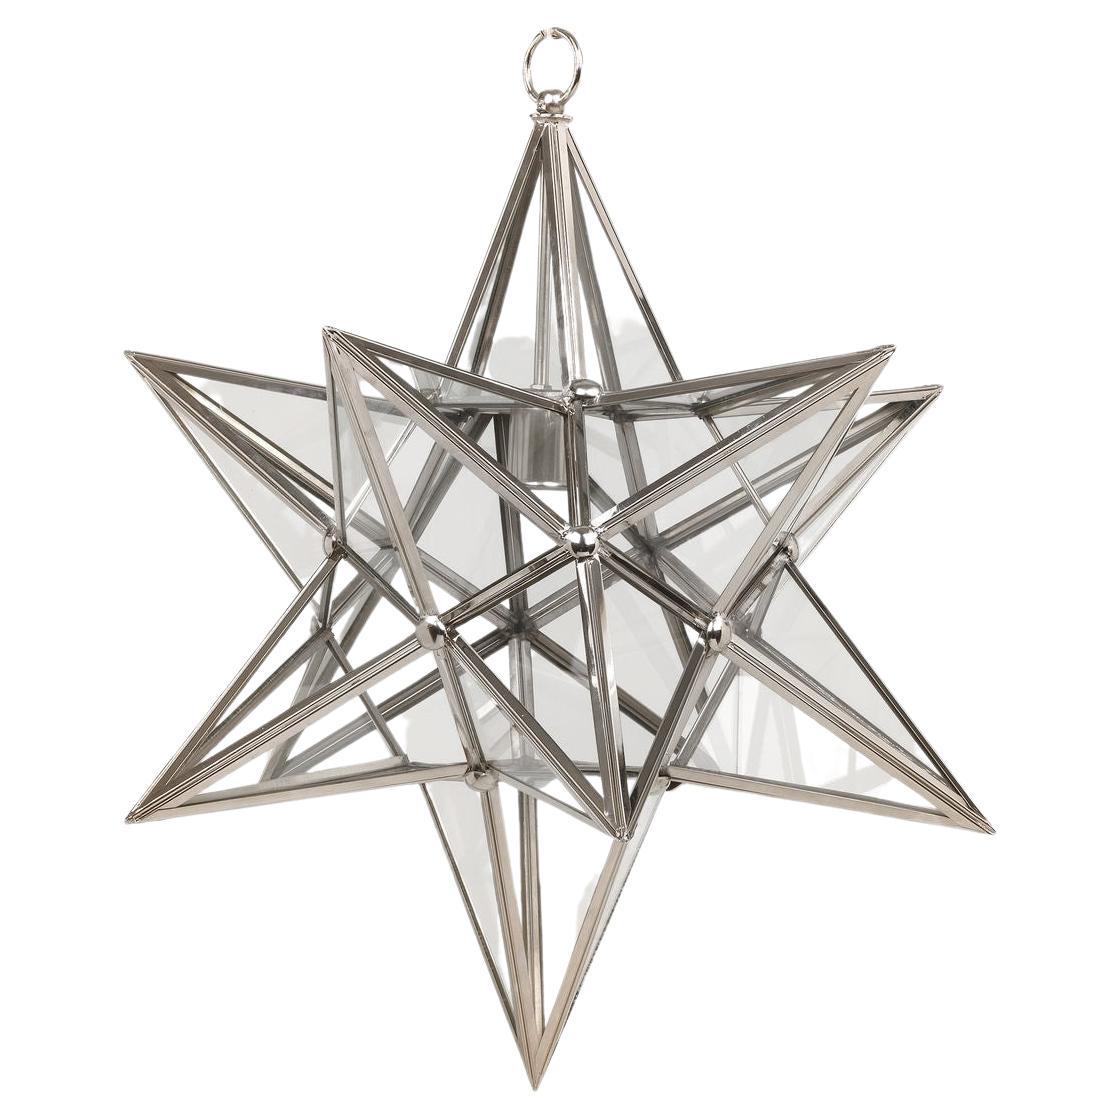 Medium Pointed Star Suspension with Brass Structure and Glass